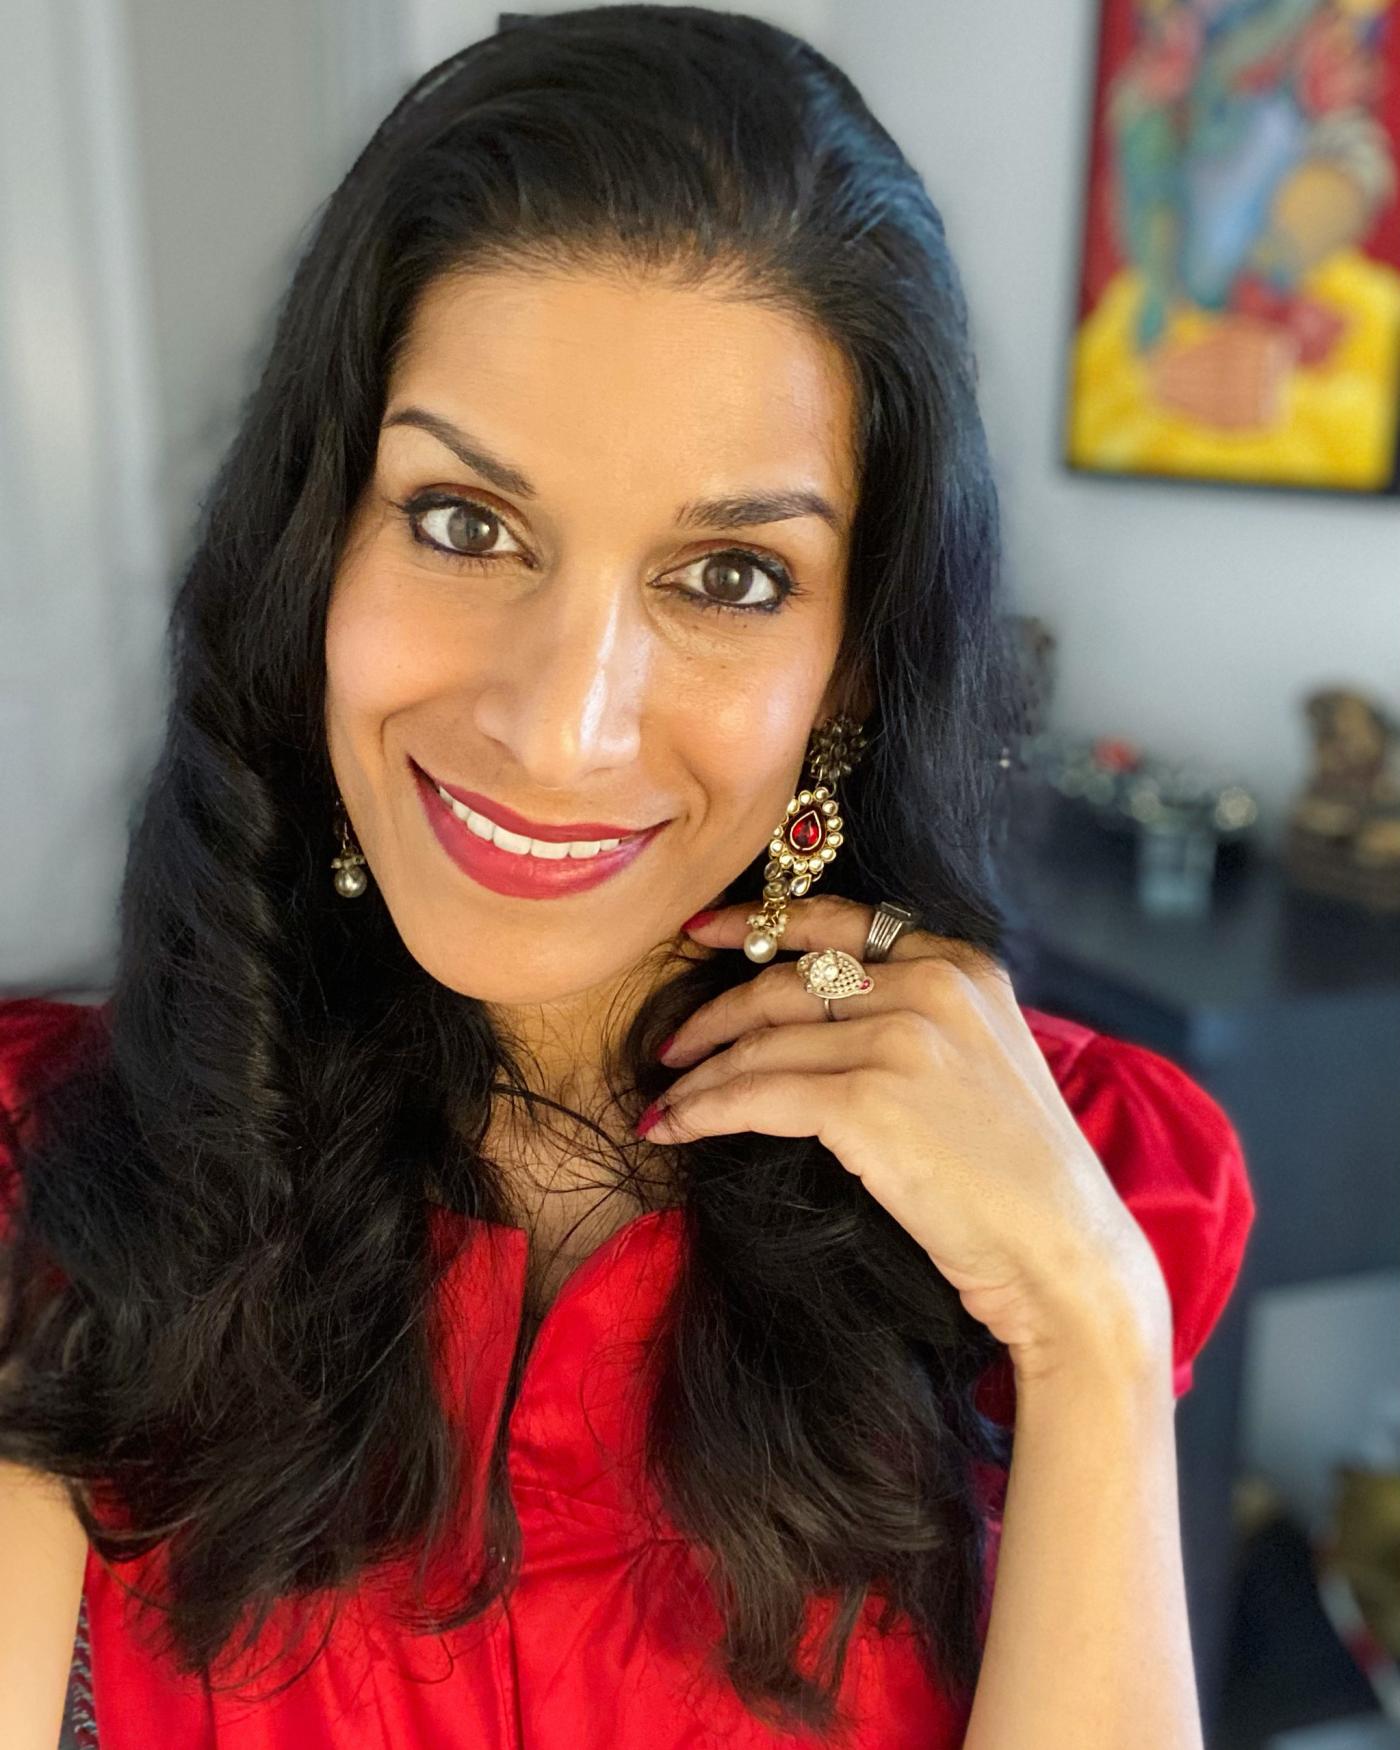 Mesma is an Indian woman with red lips, a red ruby earring, and a bright red shirt. 